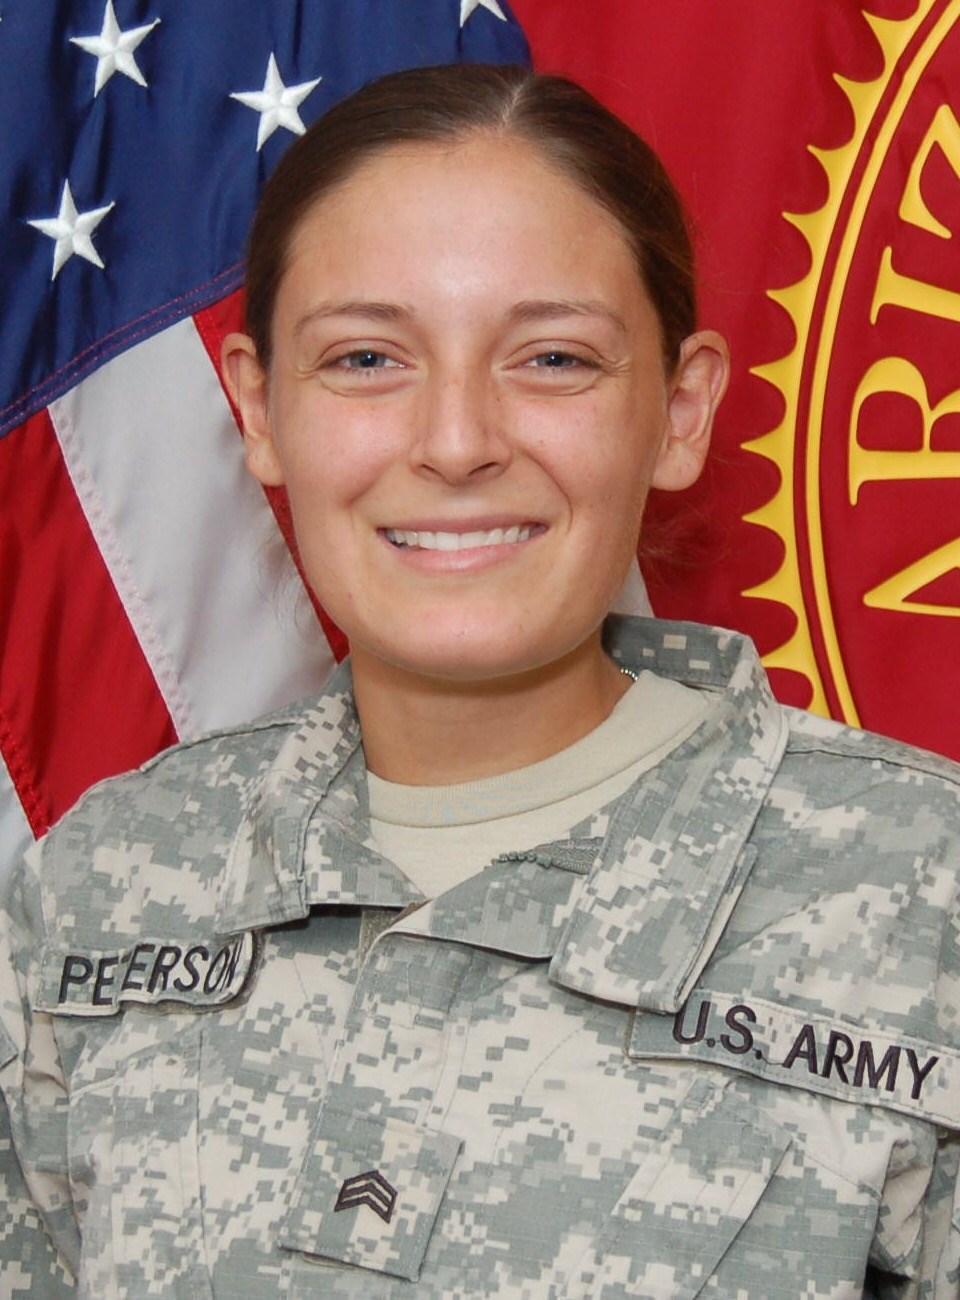 GET TO KNOW YOUR LEADERSHIP My name is Katalina Peterson. I was born in Albuquerque, NM. I m an Army brat, who has grown up from New York to California with my longest stay in Ft. Leonard Wood, MO.